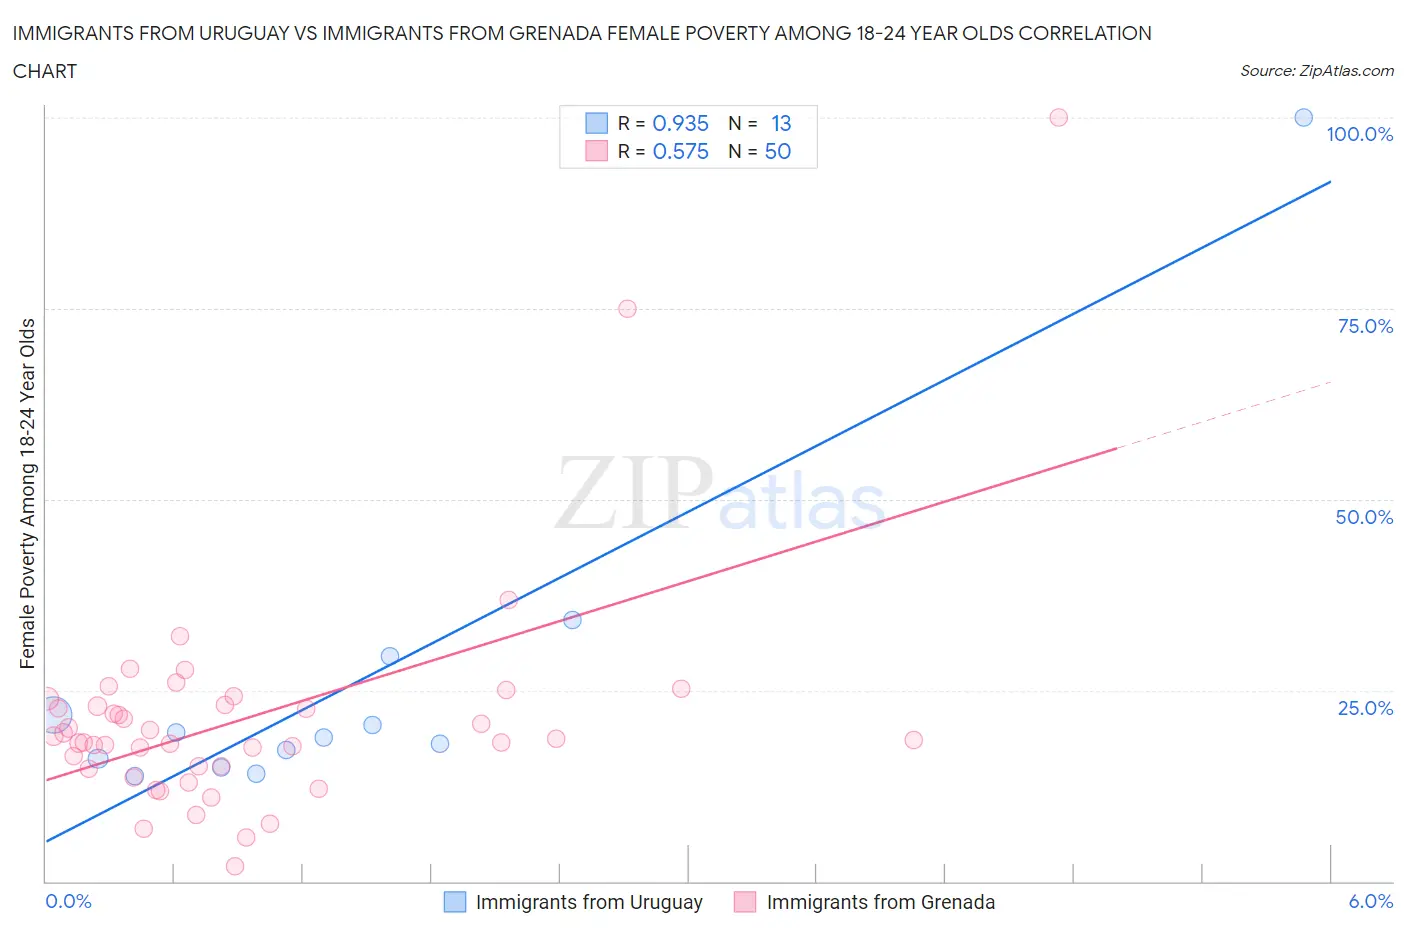 Immigrants from Uruguay vs Immigrants from Grenada Female Poverty Among 18-24 Year Olds